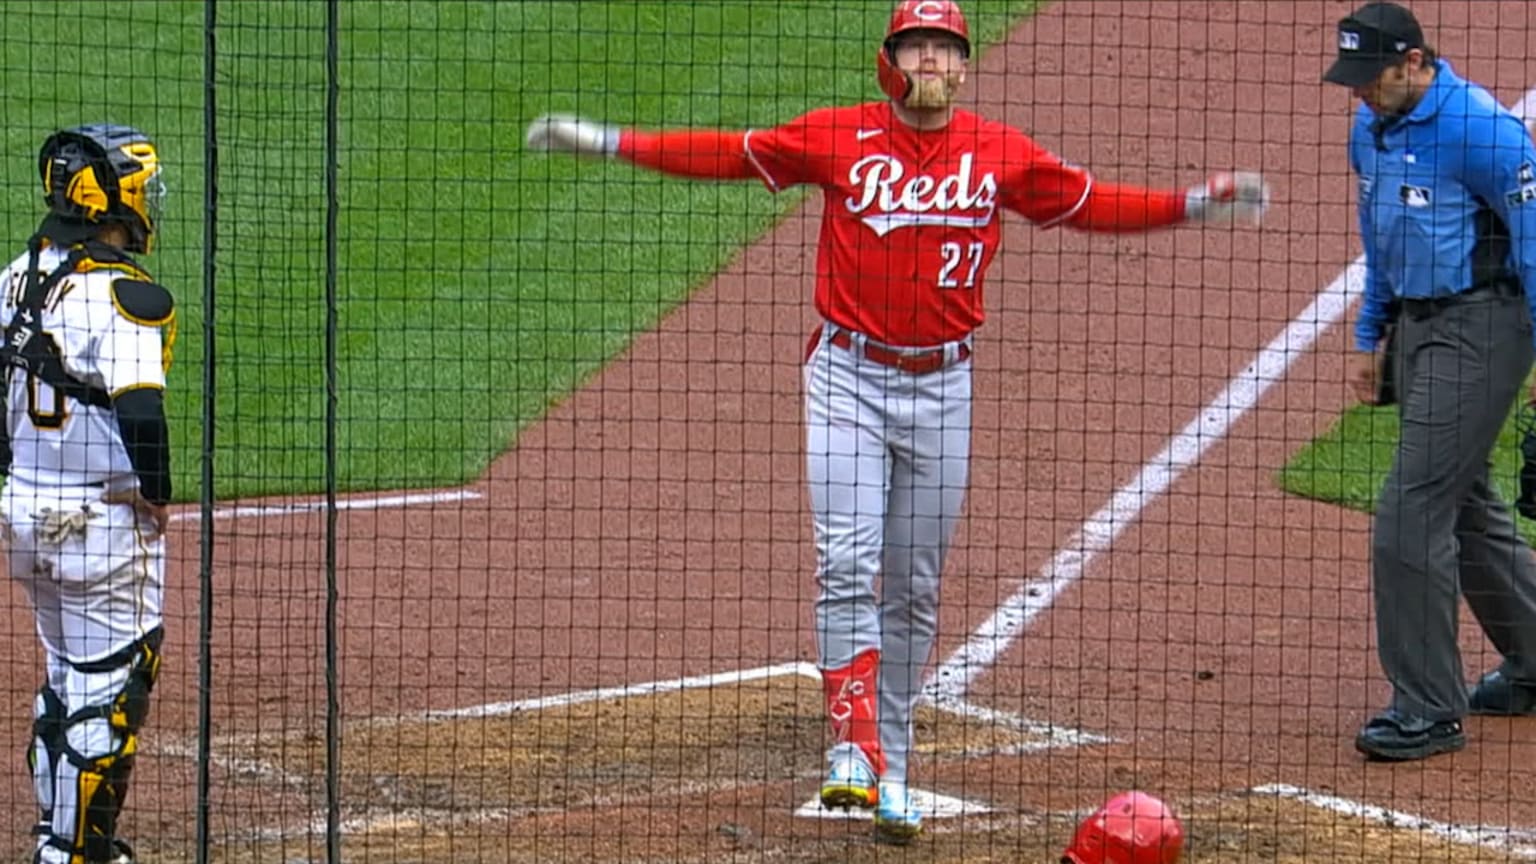 Jake Fraley takes the field for the Reds' City Connect debut, Take a jog  with Jake Fraley. #CityConnect, By Cincinnati Reds